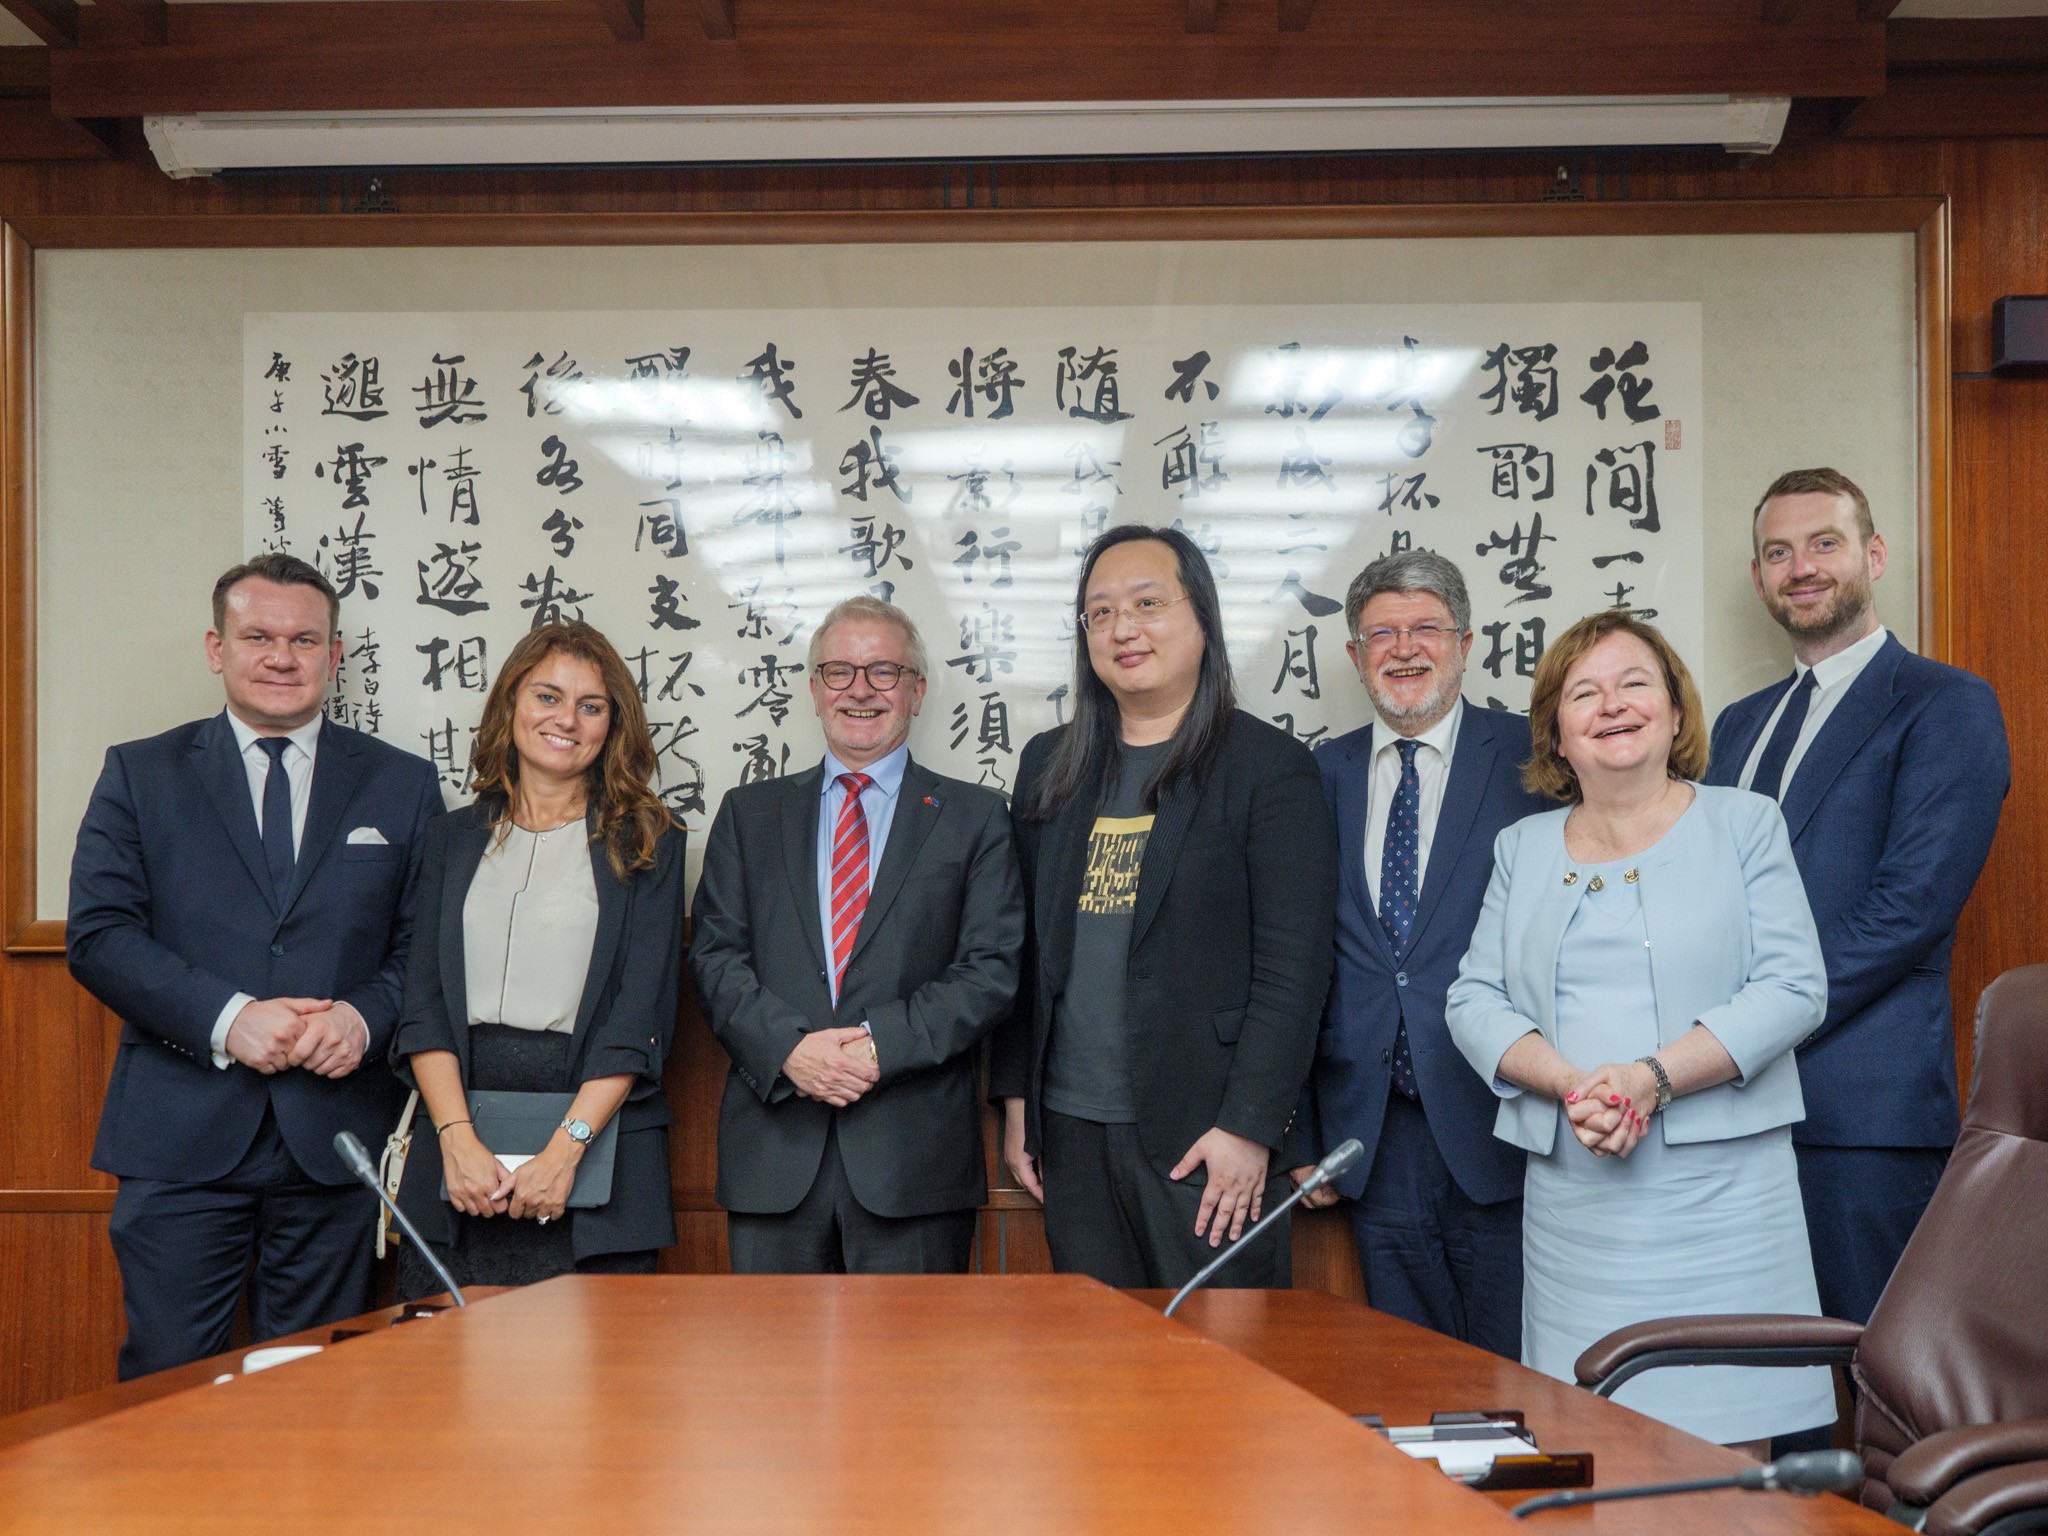 Minister Audrey Tang Met with AFET Committee MEPs to Have Further Discussion on Cyber Security